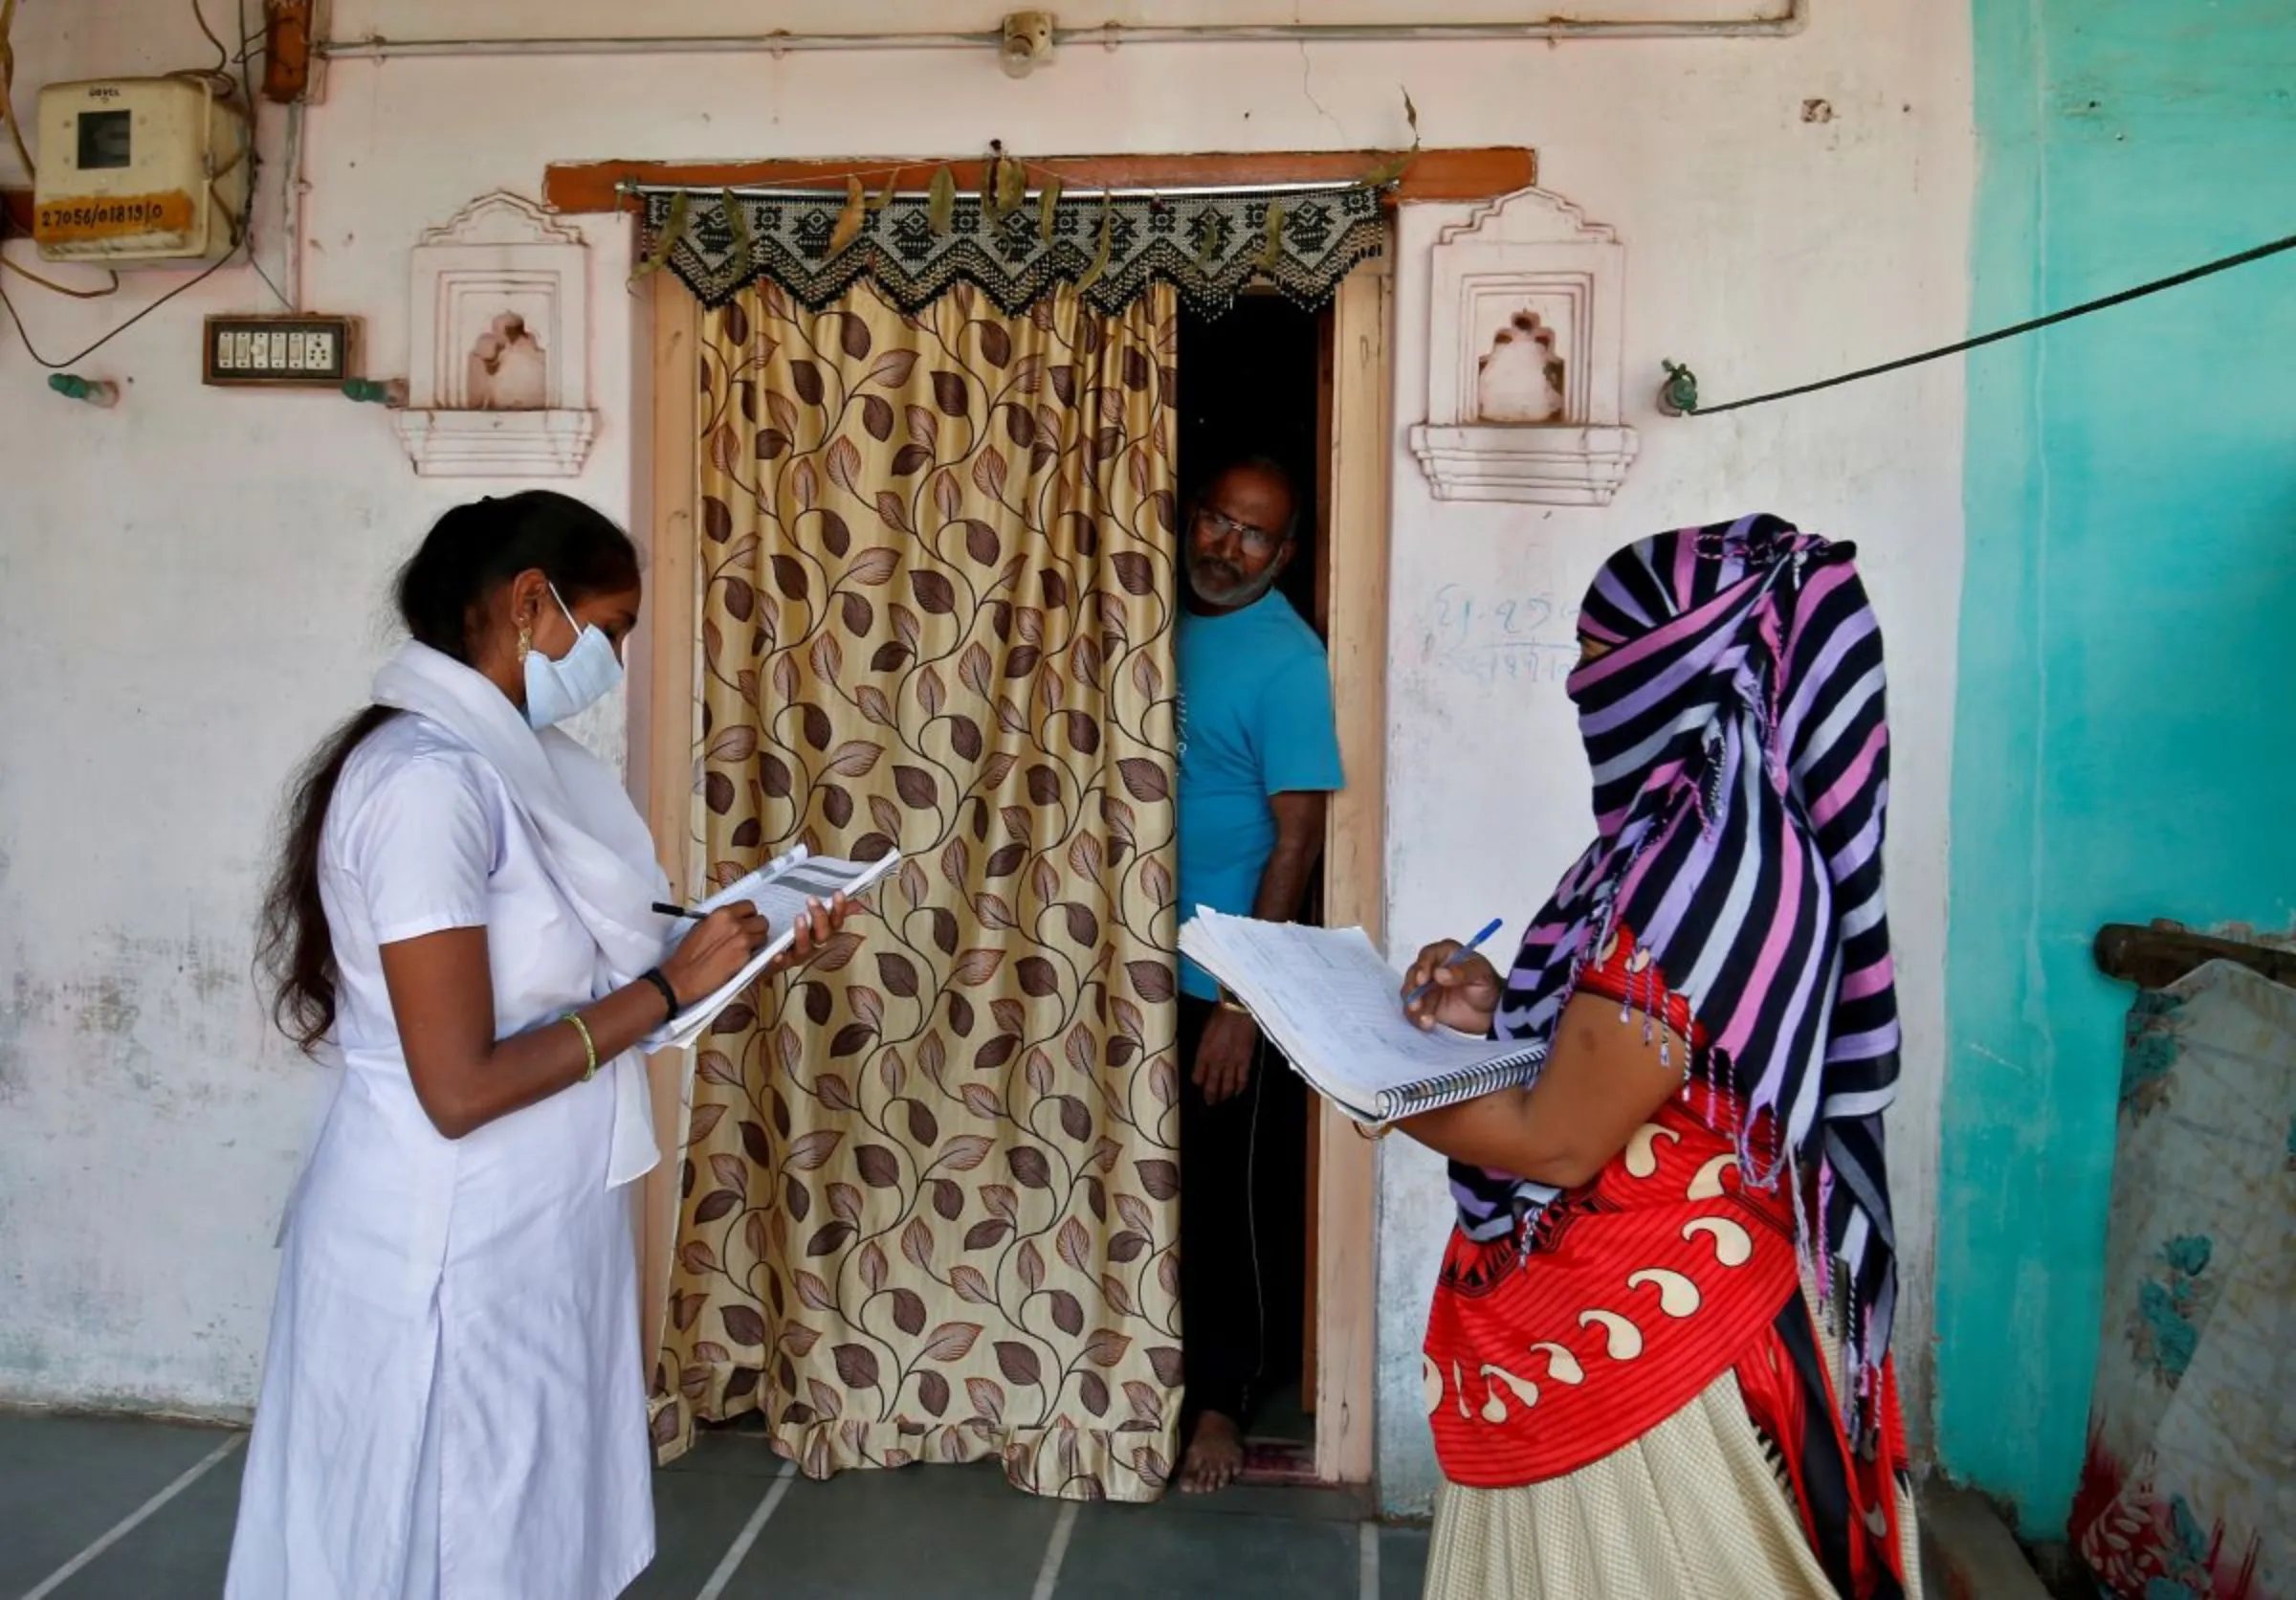 Health workers collect personal data during a door-to-door survey for the first shot of COVID-19 vaccine, in a village on the outskirts of Ahmedabad, India, December 14, 2020